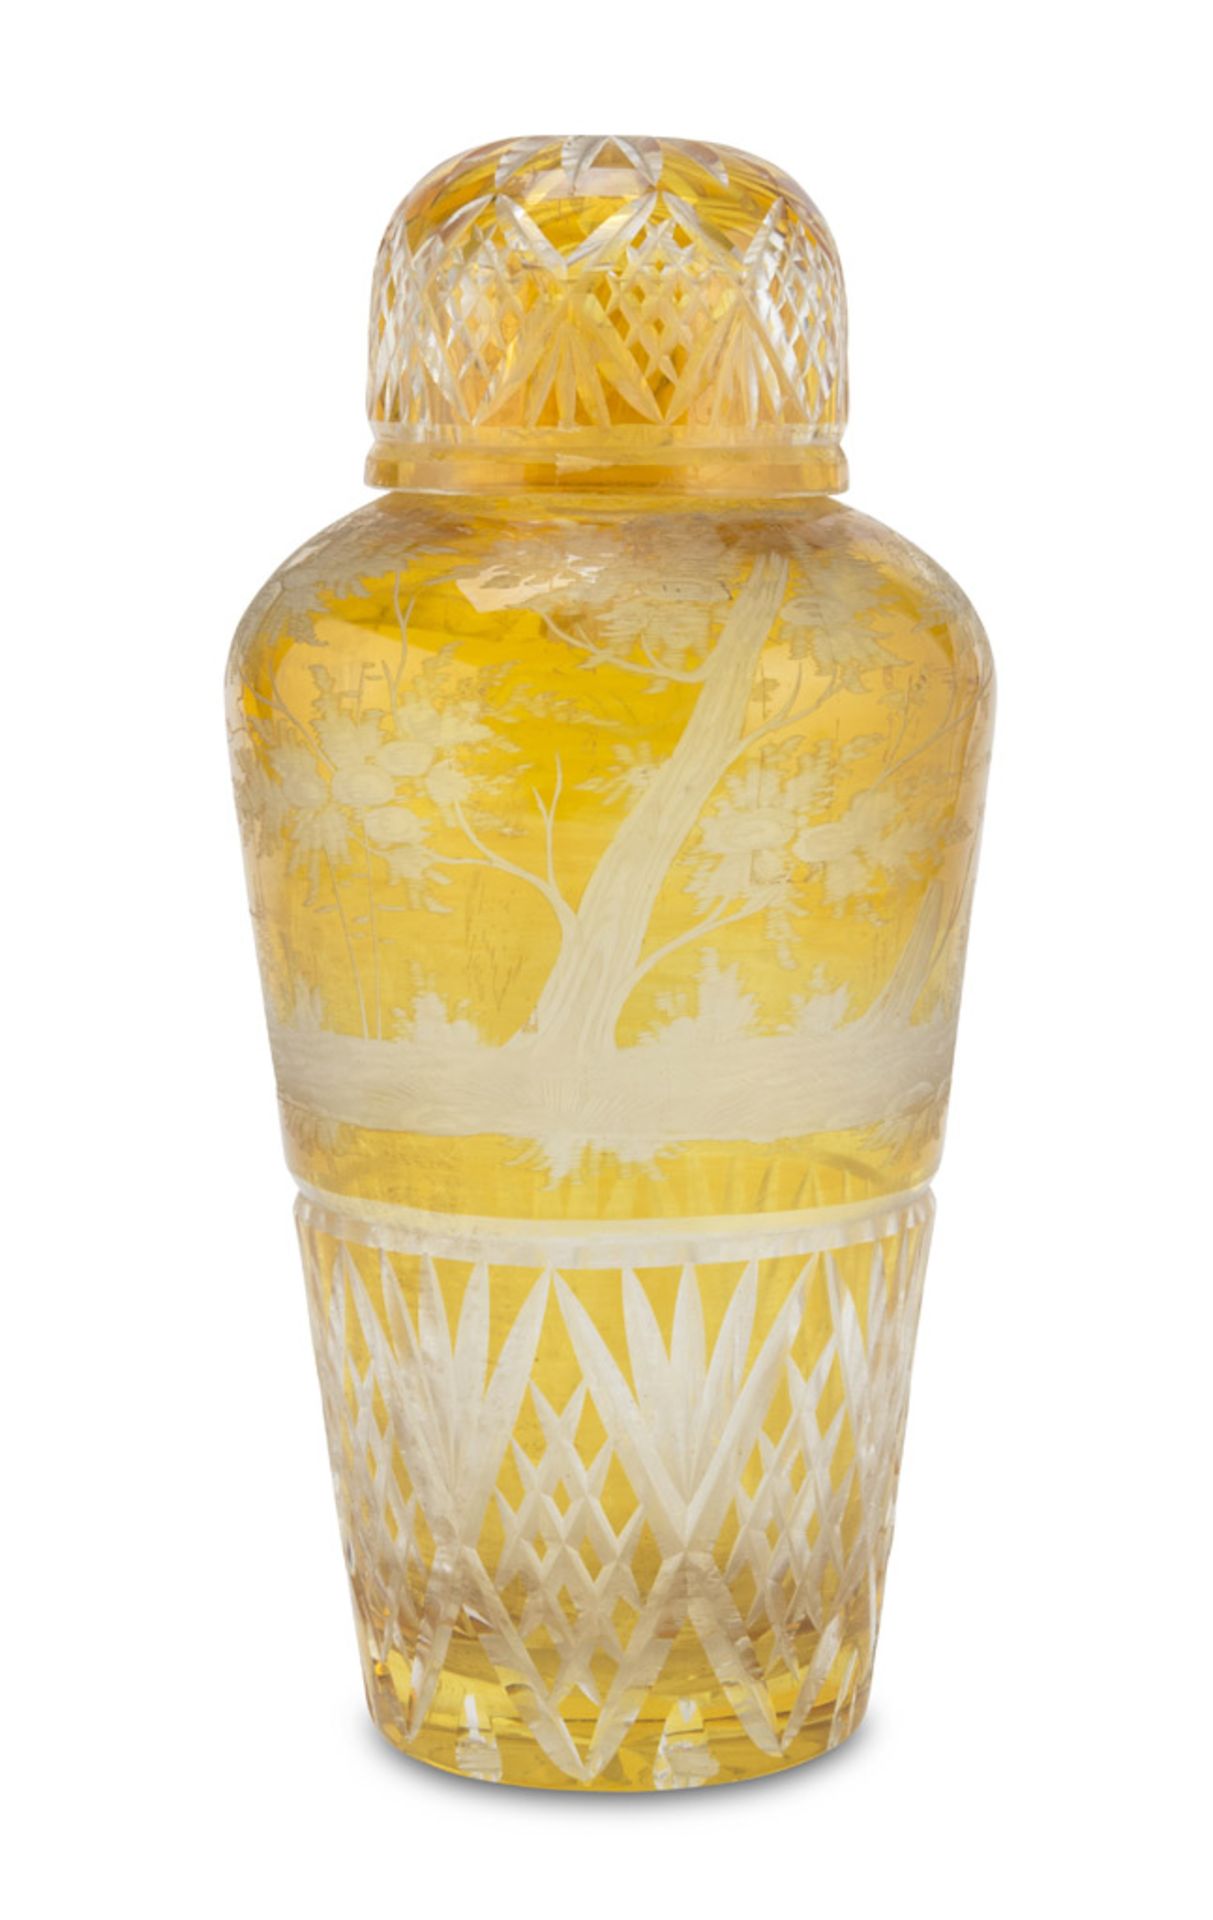 POTICHE IN CUT CRYSTAL, BOEMIA EARLY 20TH CENTURY yellow body decorated with landscape and bucks.